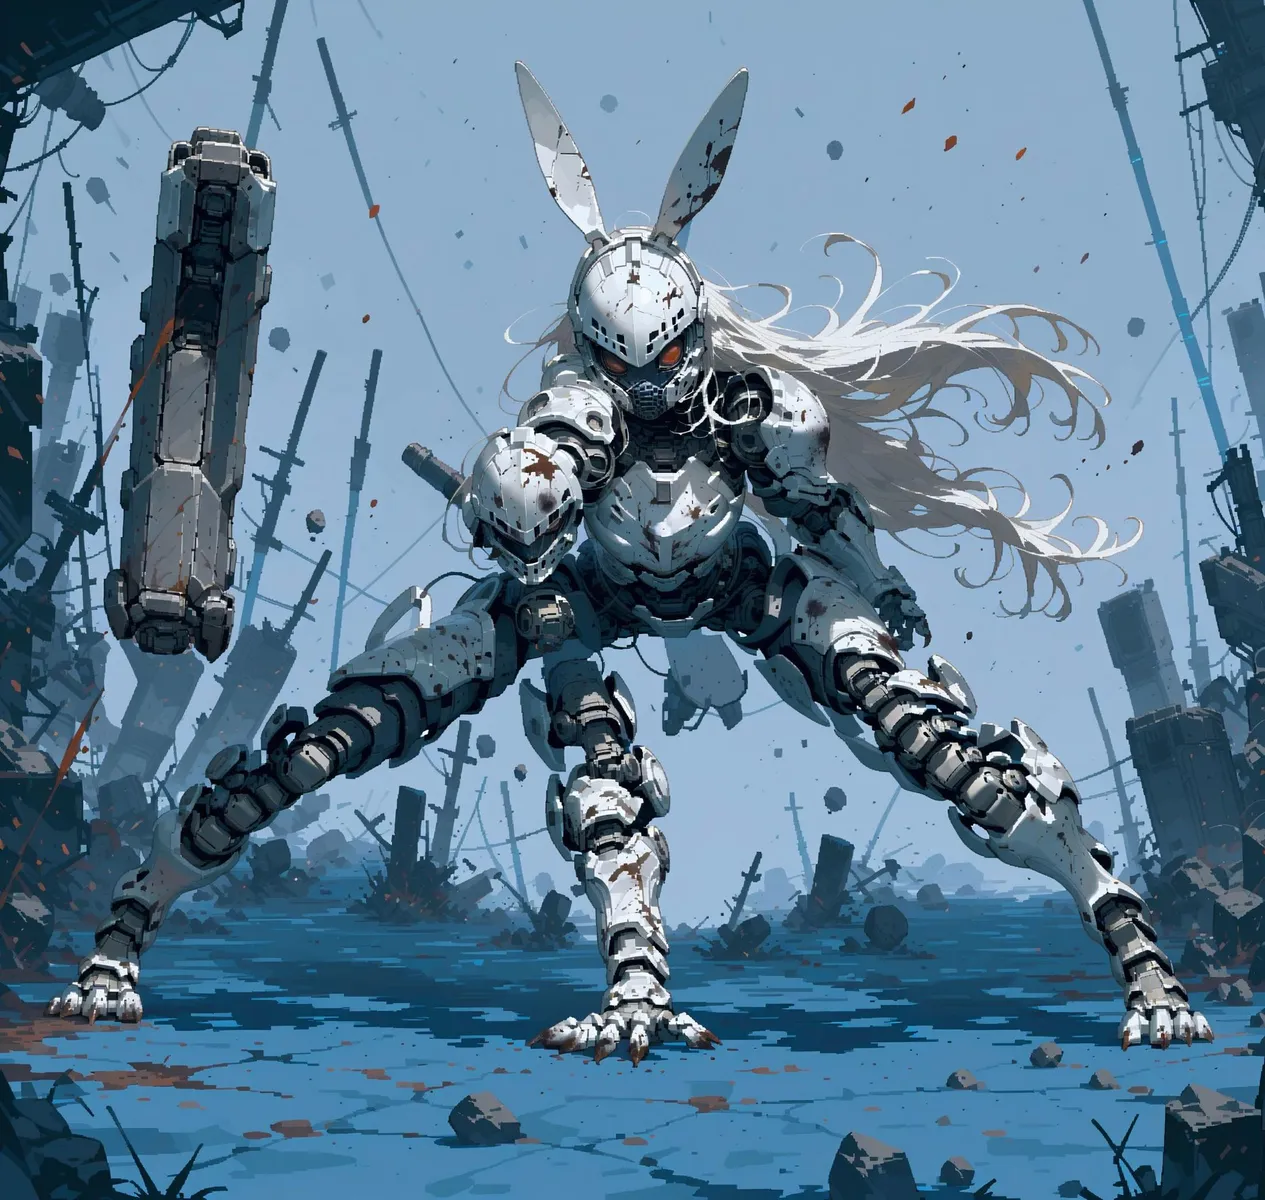 A robotic rabbit warrior with a sword in a post-apocalyptic scene. AI generated image using Stable Diffusion.